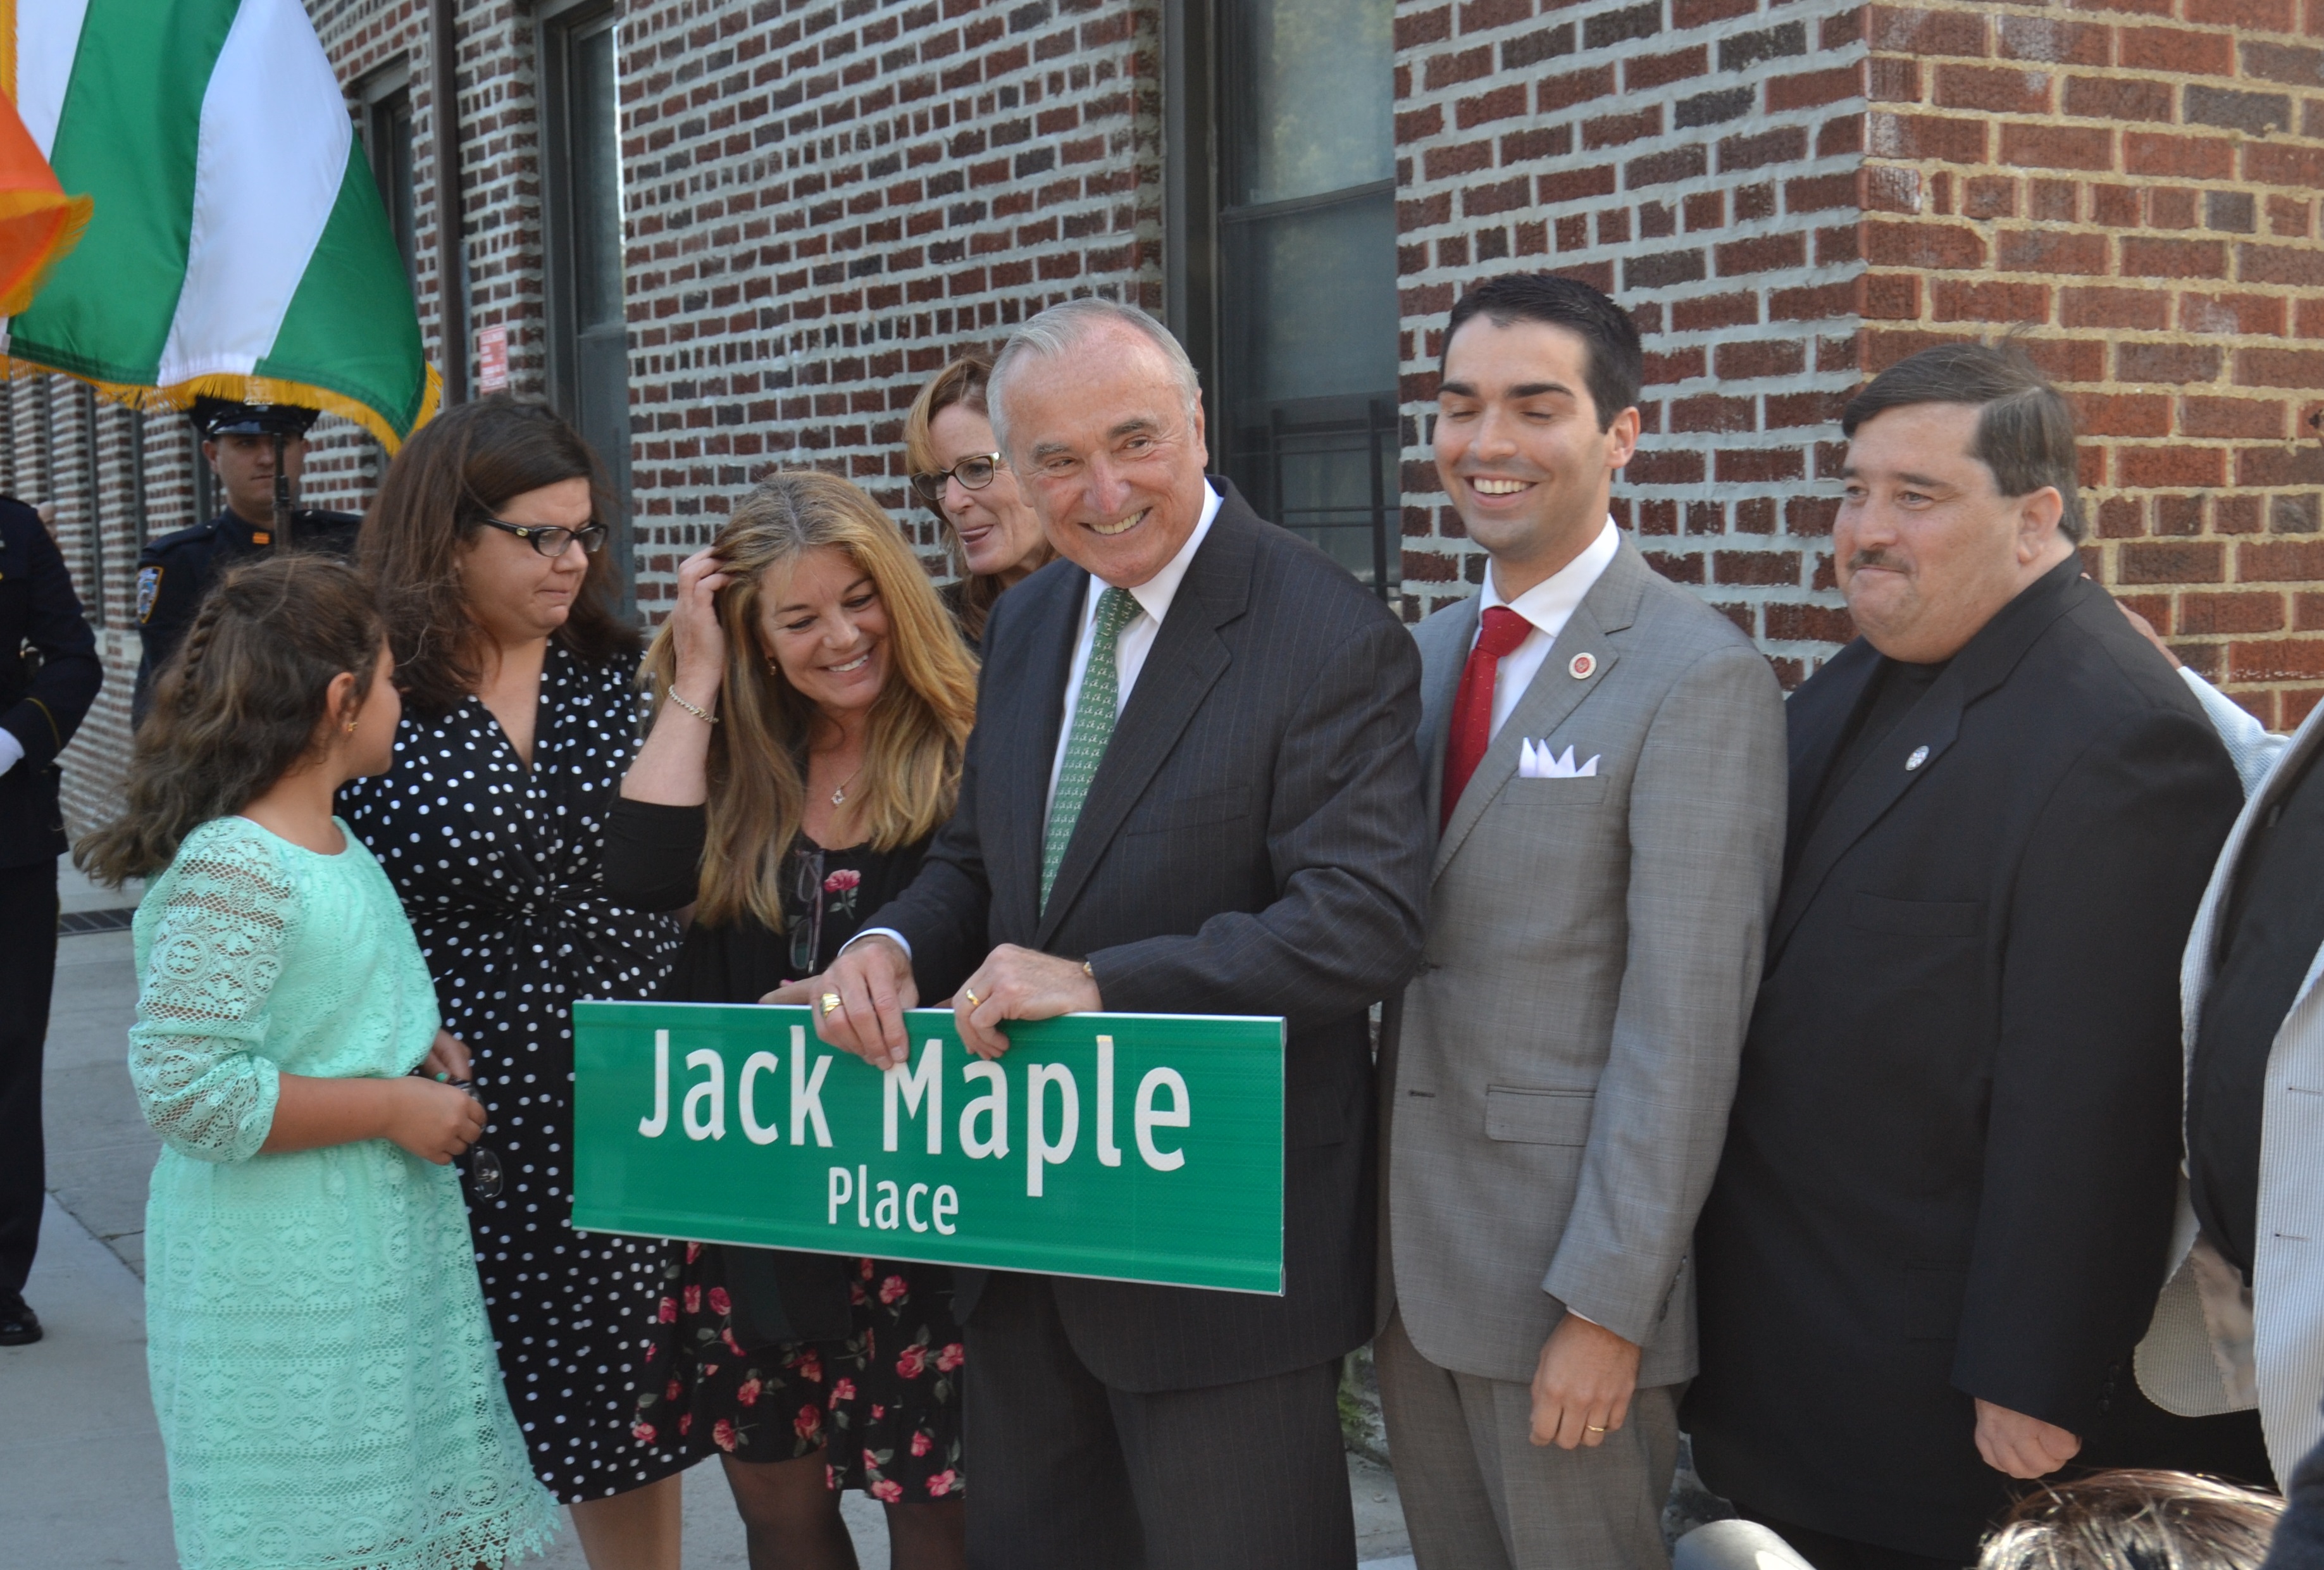 Members of Jack Maple's family (left) along with NYPD Commissioner Bill Bratton (center), Councilman Eric Ulric and Assemblyman Mike Miller present Jack Maple Way.